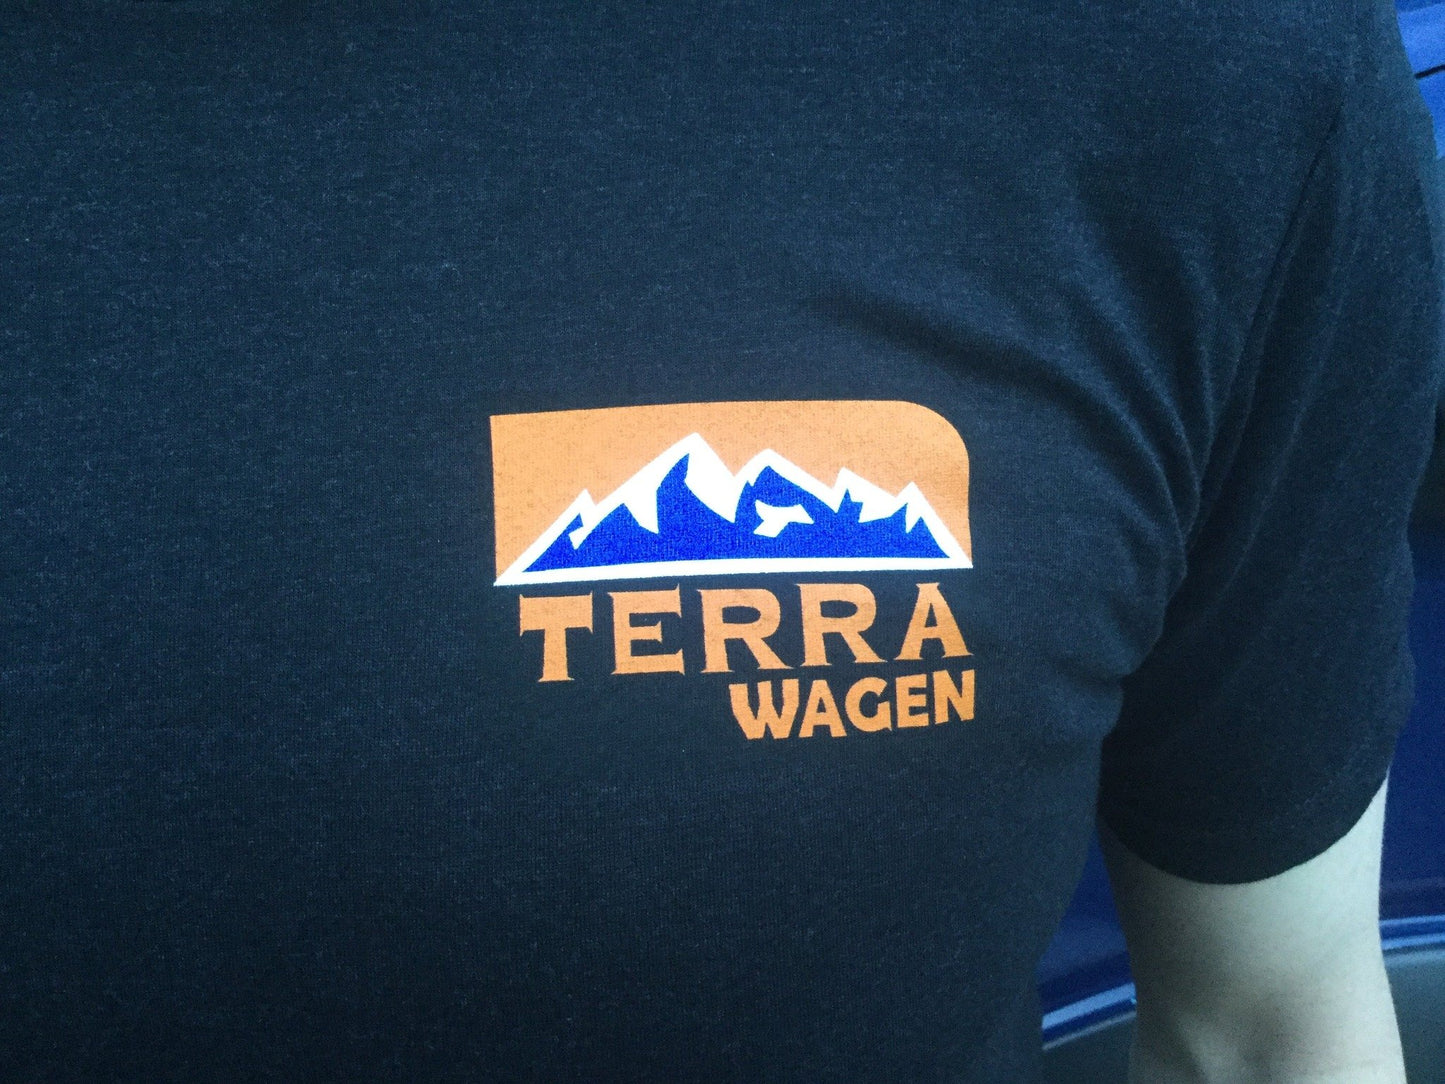 Terrawagen "Get your flare on" T-shirt